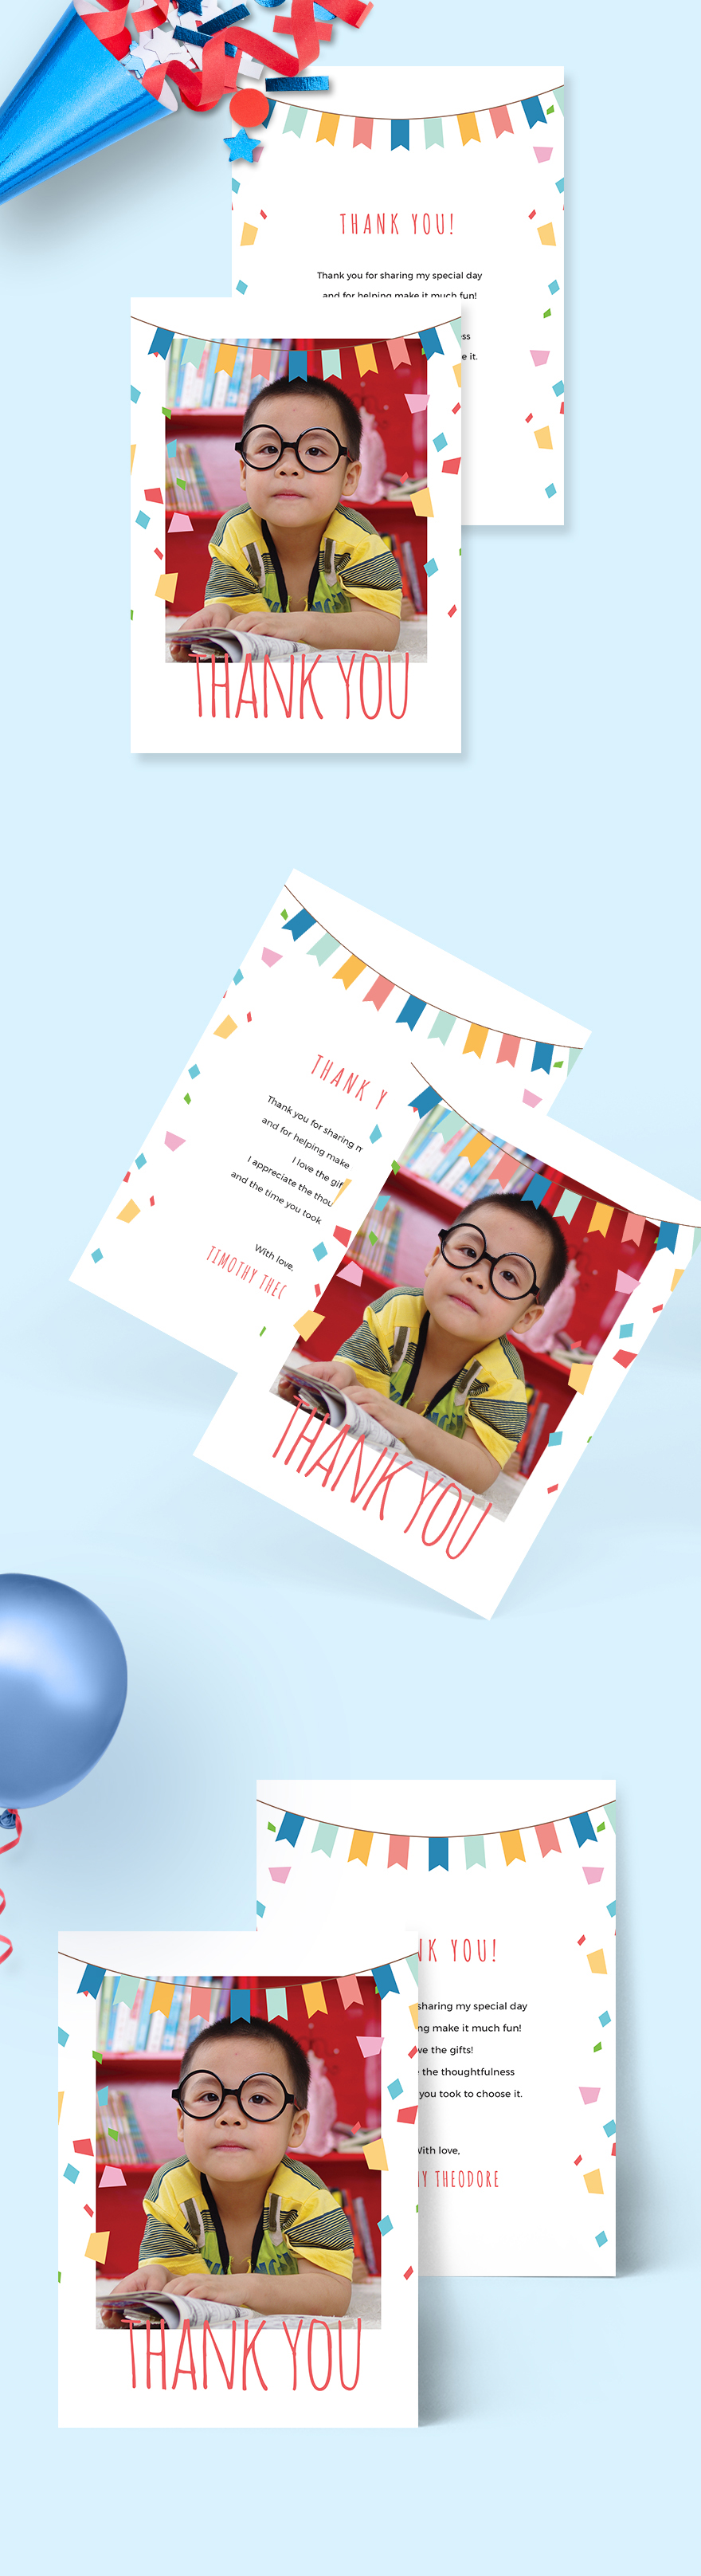 Birthday Thank You Card Templates - Design, Free, Download | Template.net